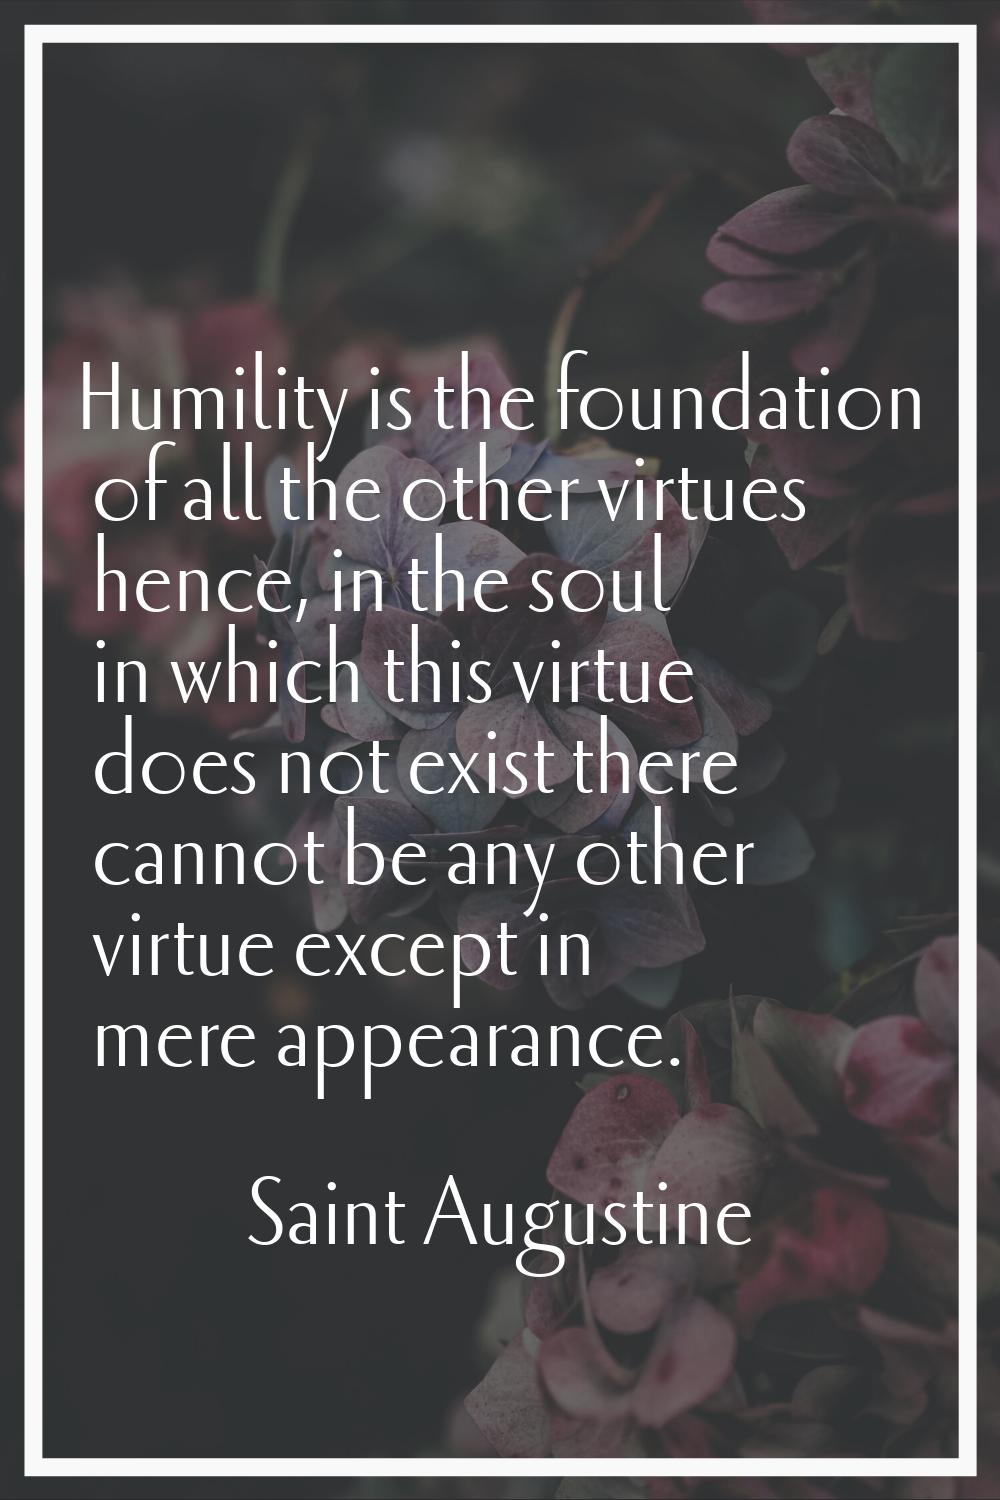 Humility is the foundation of all the other virtues hence, in the soul in which this virtue does no